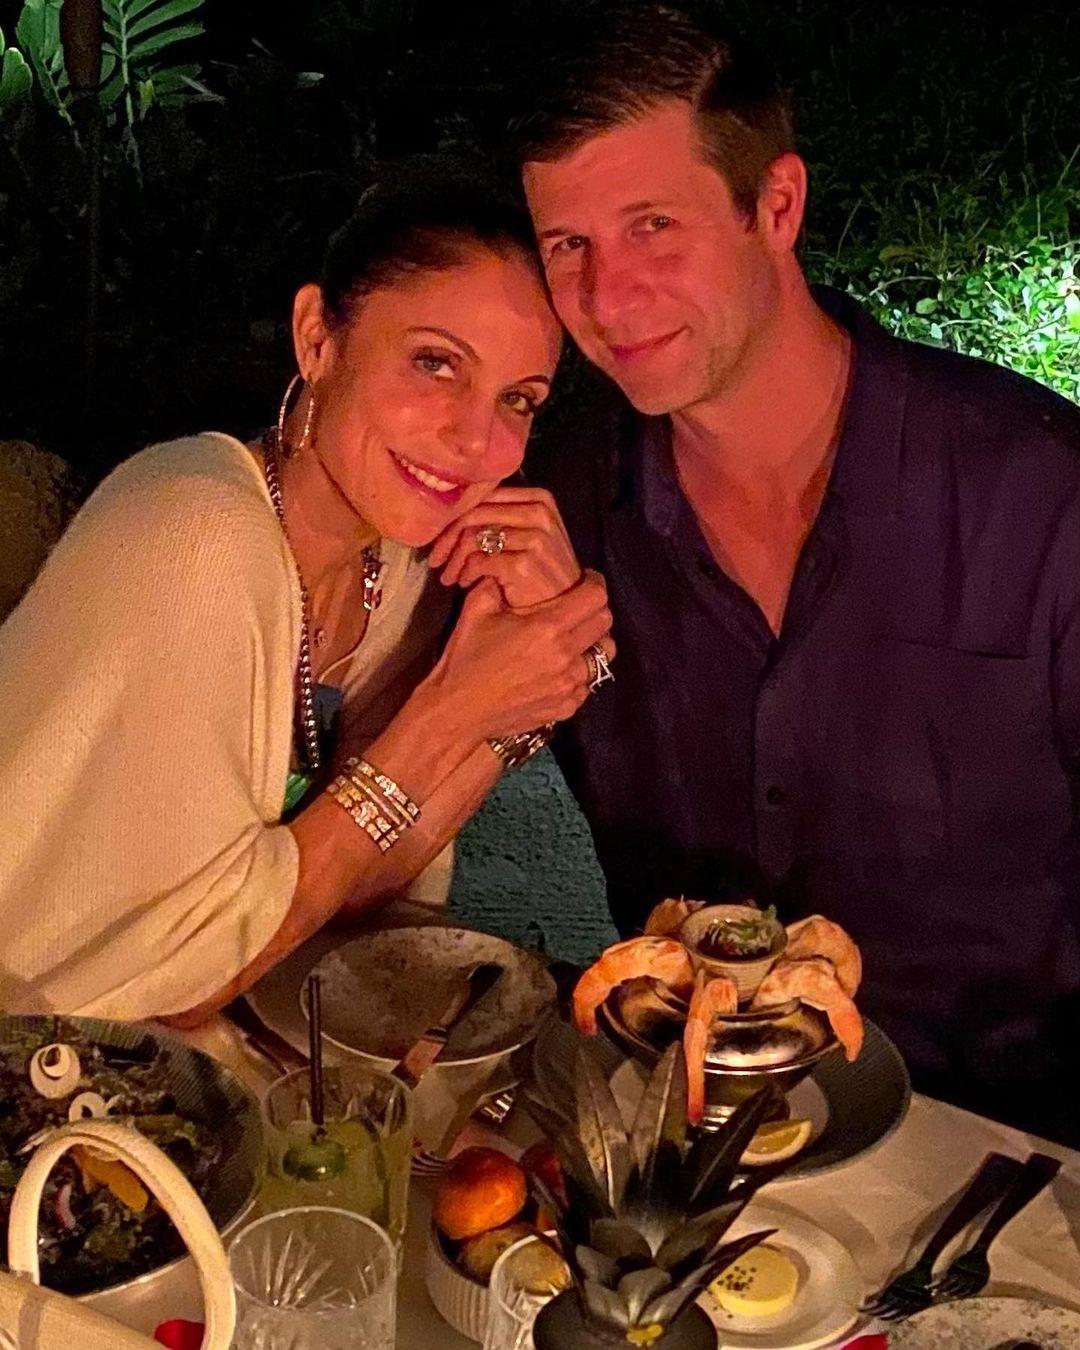 Bethenny Frankel Tells Her Engagement Story While Flaunting Her Massive Diamond Rock